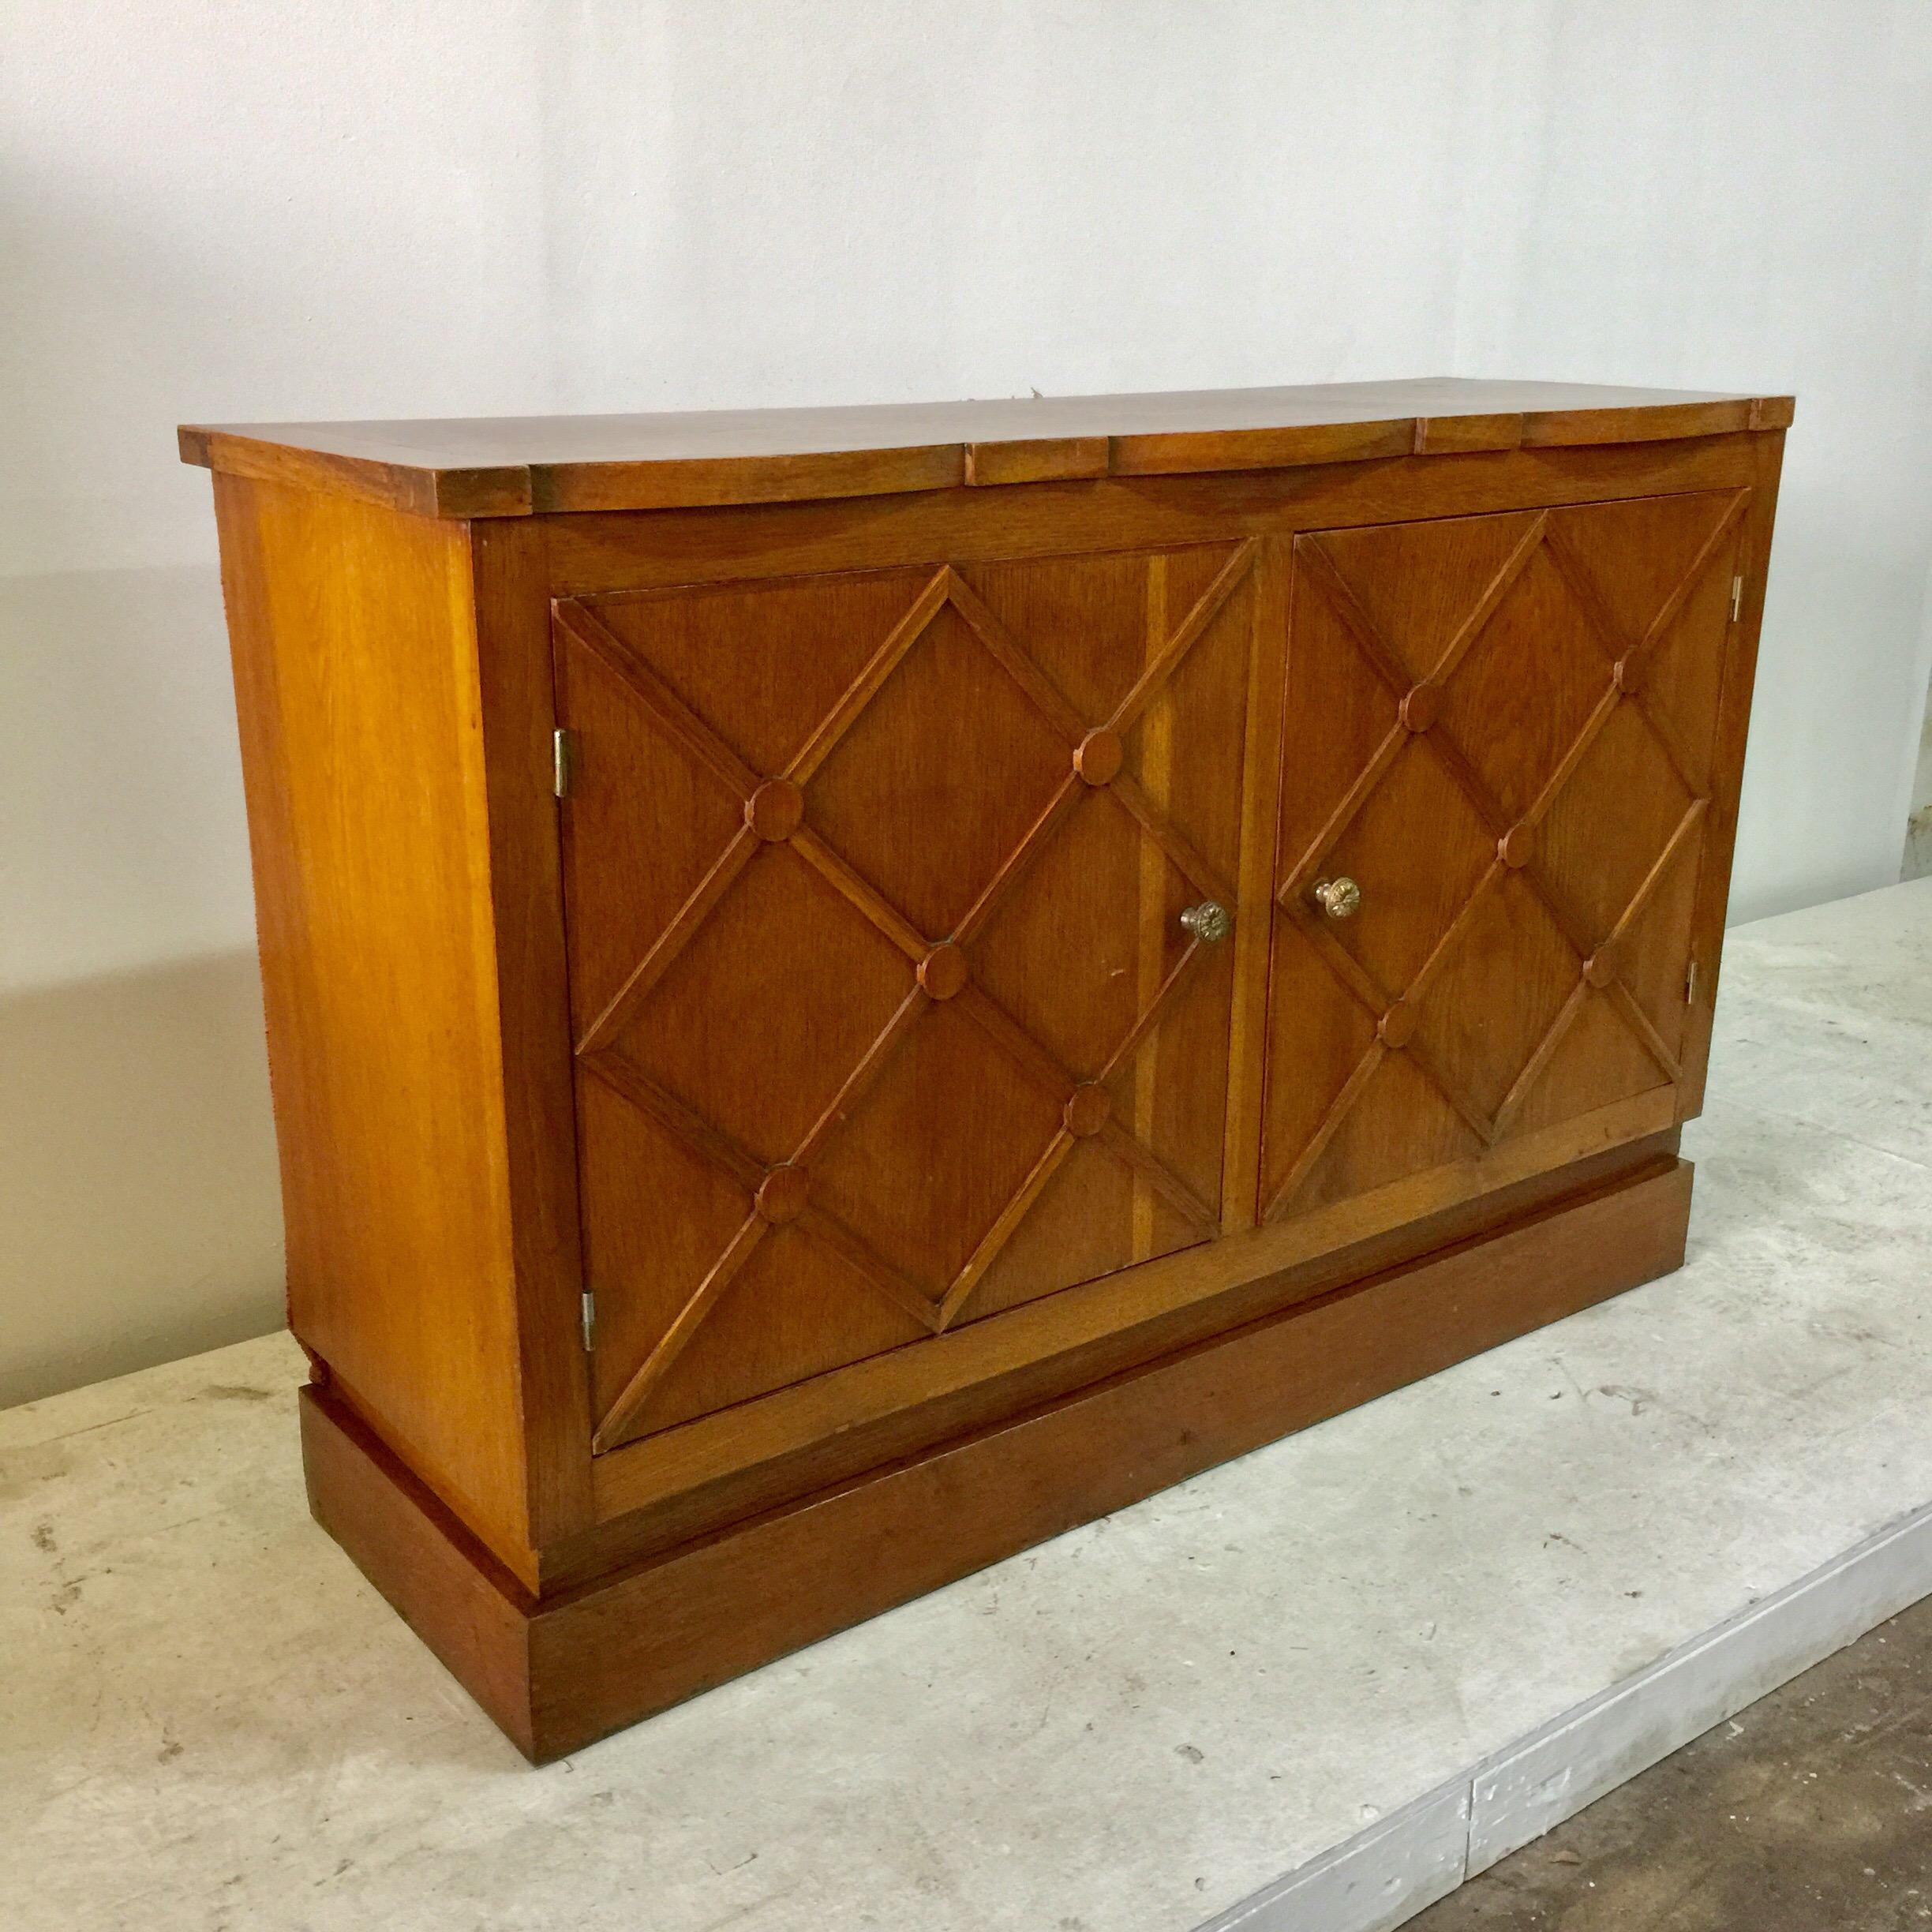 This piece was customized for a specific commercial space in 1940s in the style of Jean Royère. 2 doors open to open shelving. The sides of this cabinet are being left “as found” which was likely inserted in to a niche space. This is all oak. Note: